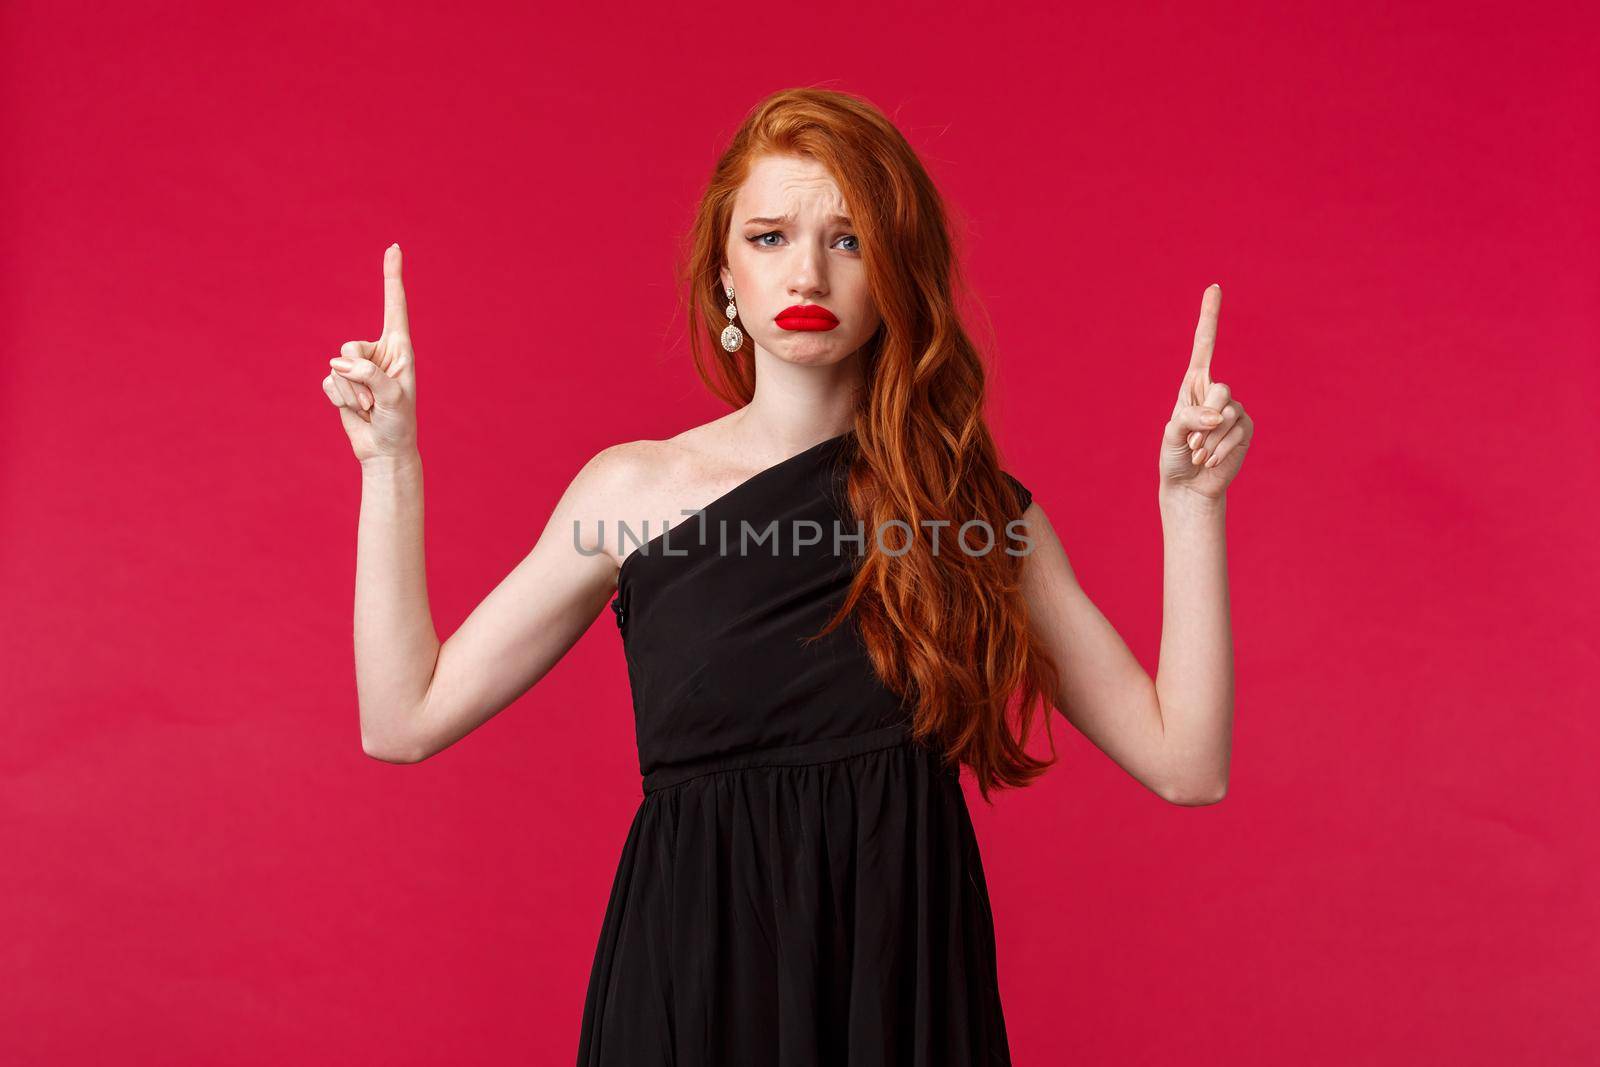 Celebration, events, fashion concept. Portrait of sad and gloomy redhead woman complaining on spoiled and ruined party, wear elegant black dress, evening makeup, frowning and grimacing point up.